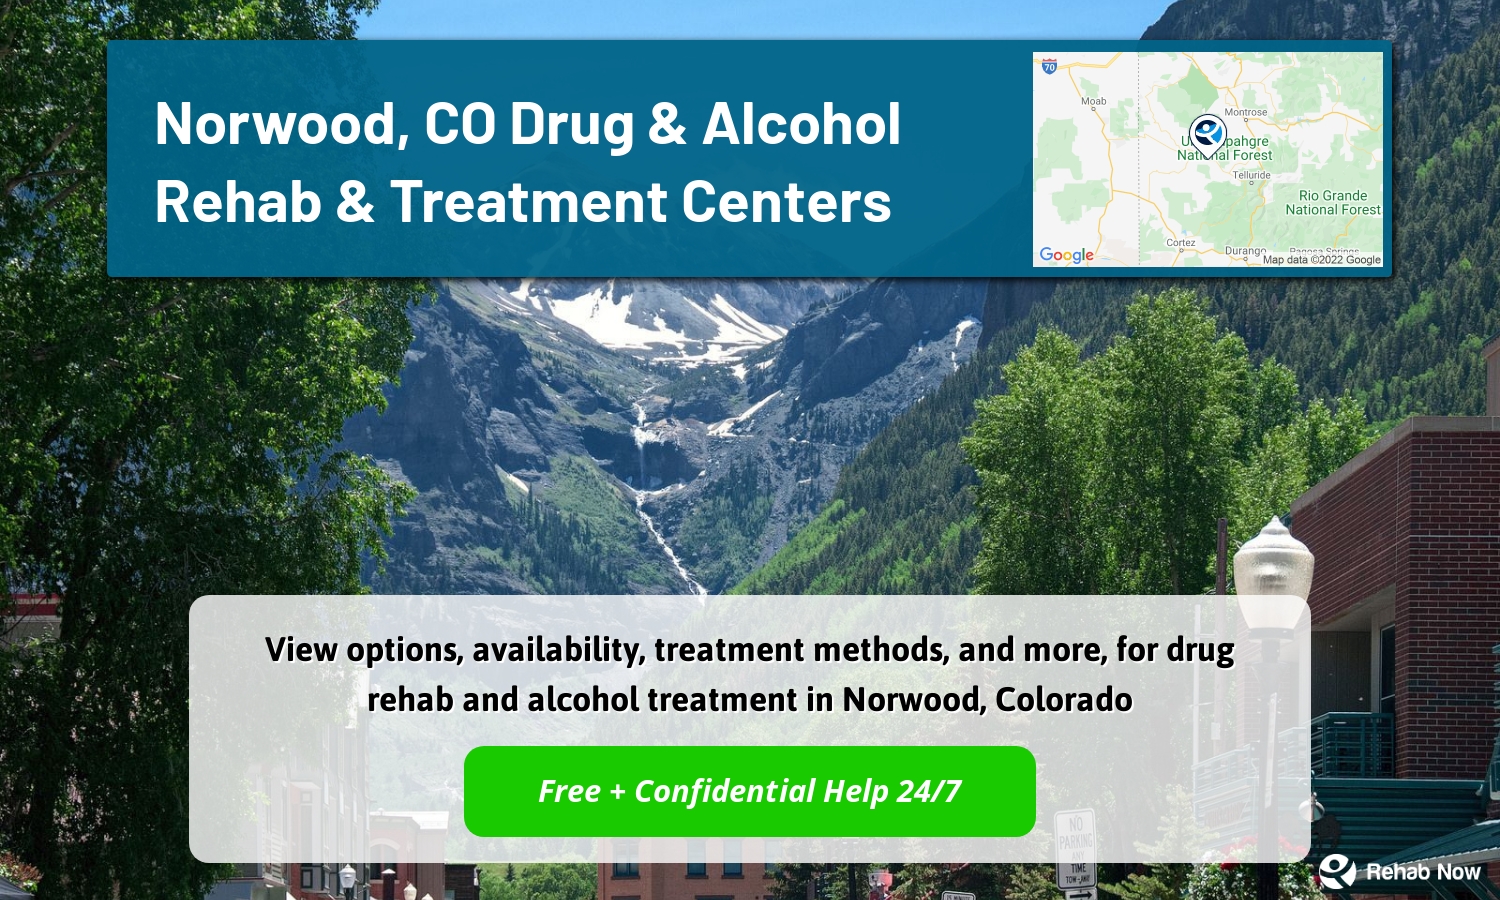 View options, availability, treatment methods, and more, for drug rehab and alcohol treatment in Norwood, Colorado